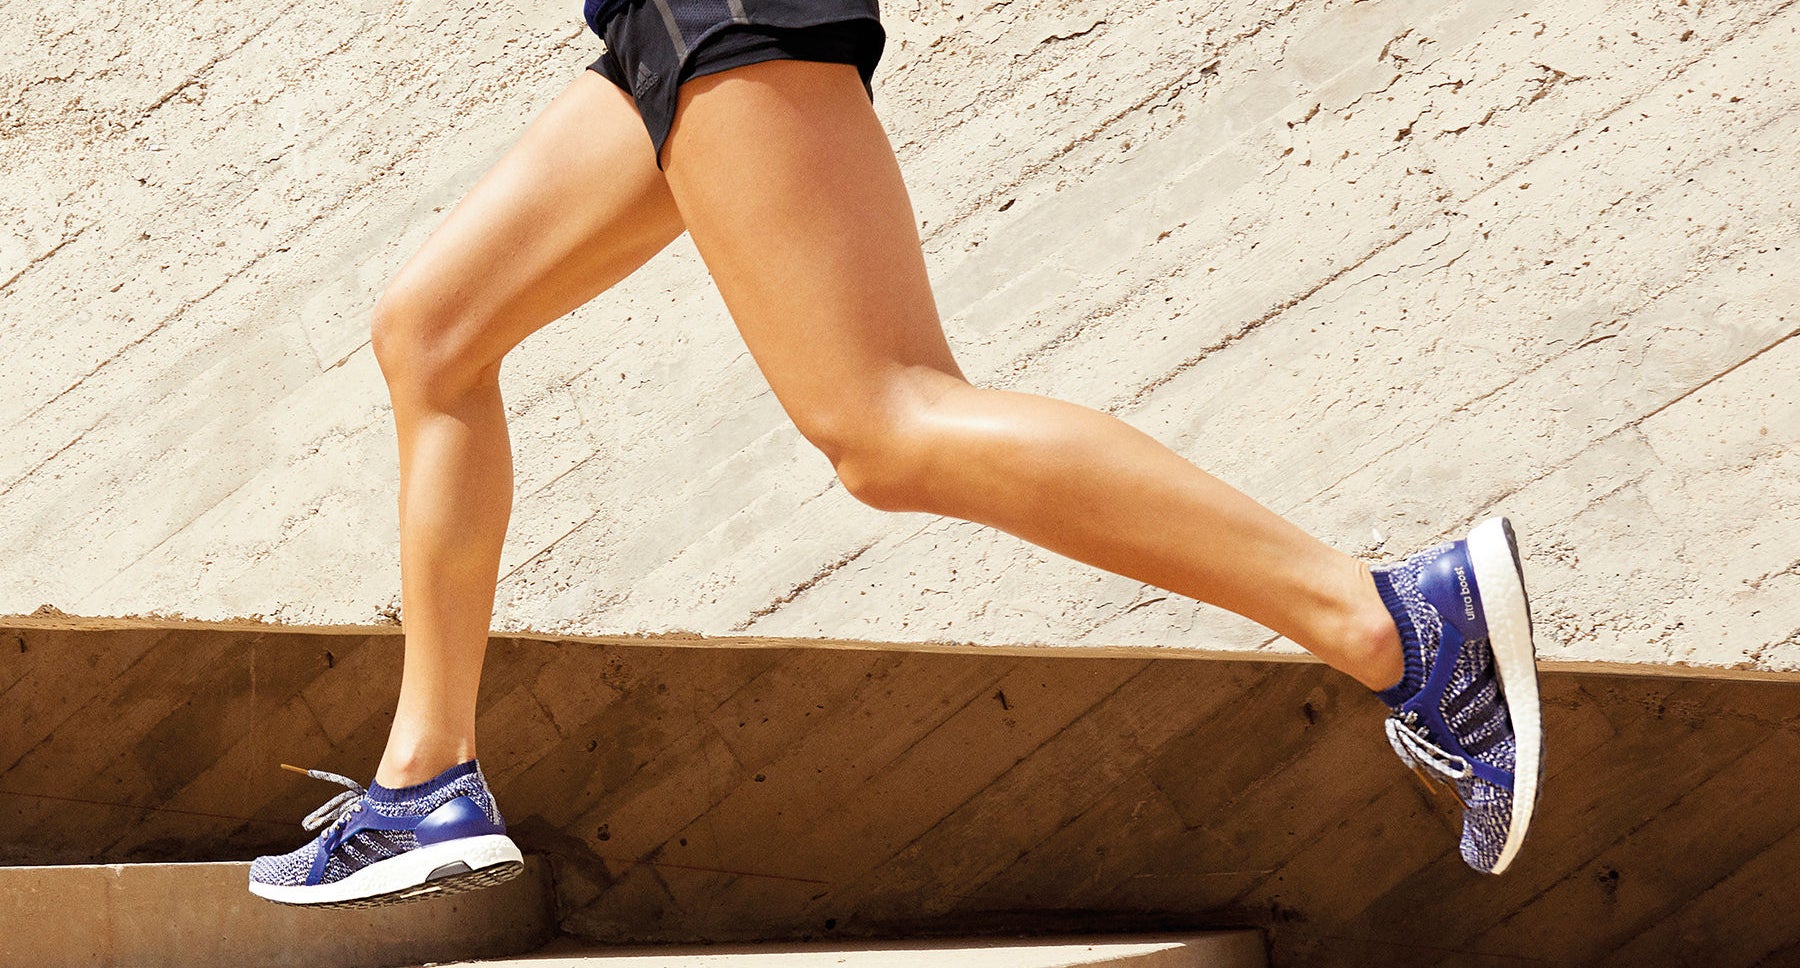 Why Is It Important To Wear Proper Shoes For Running Or Working